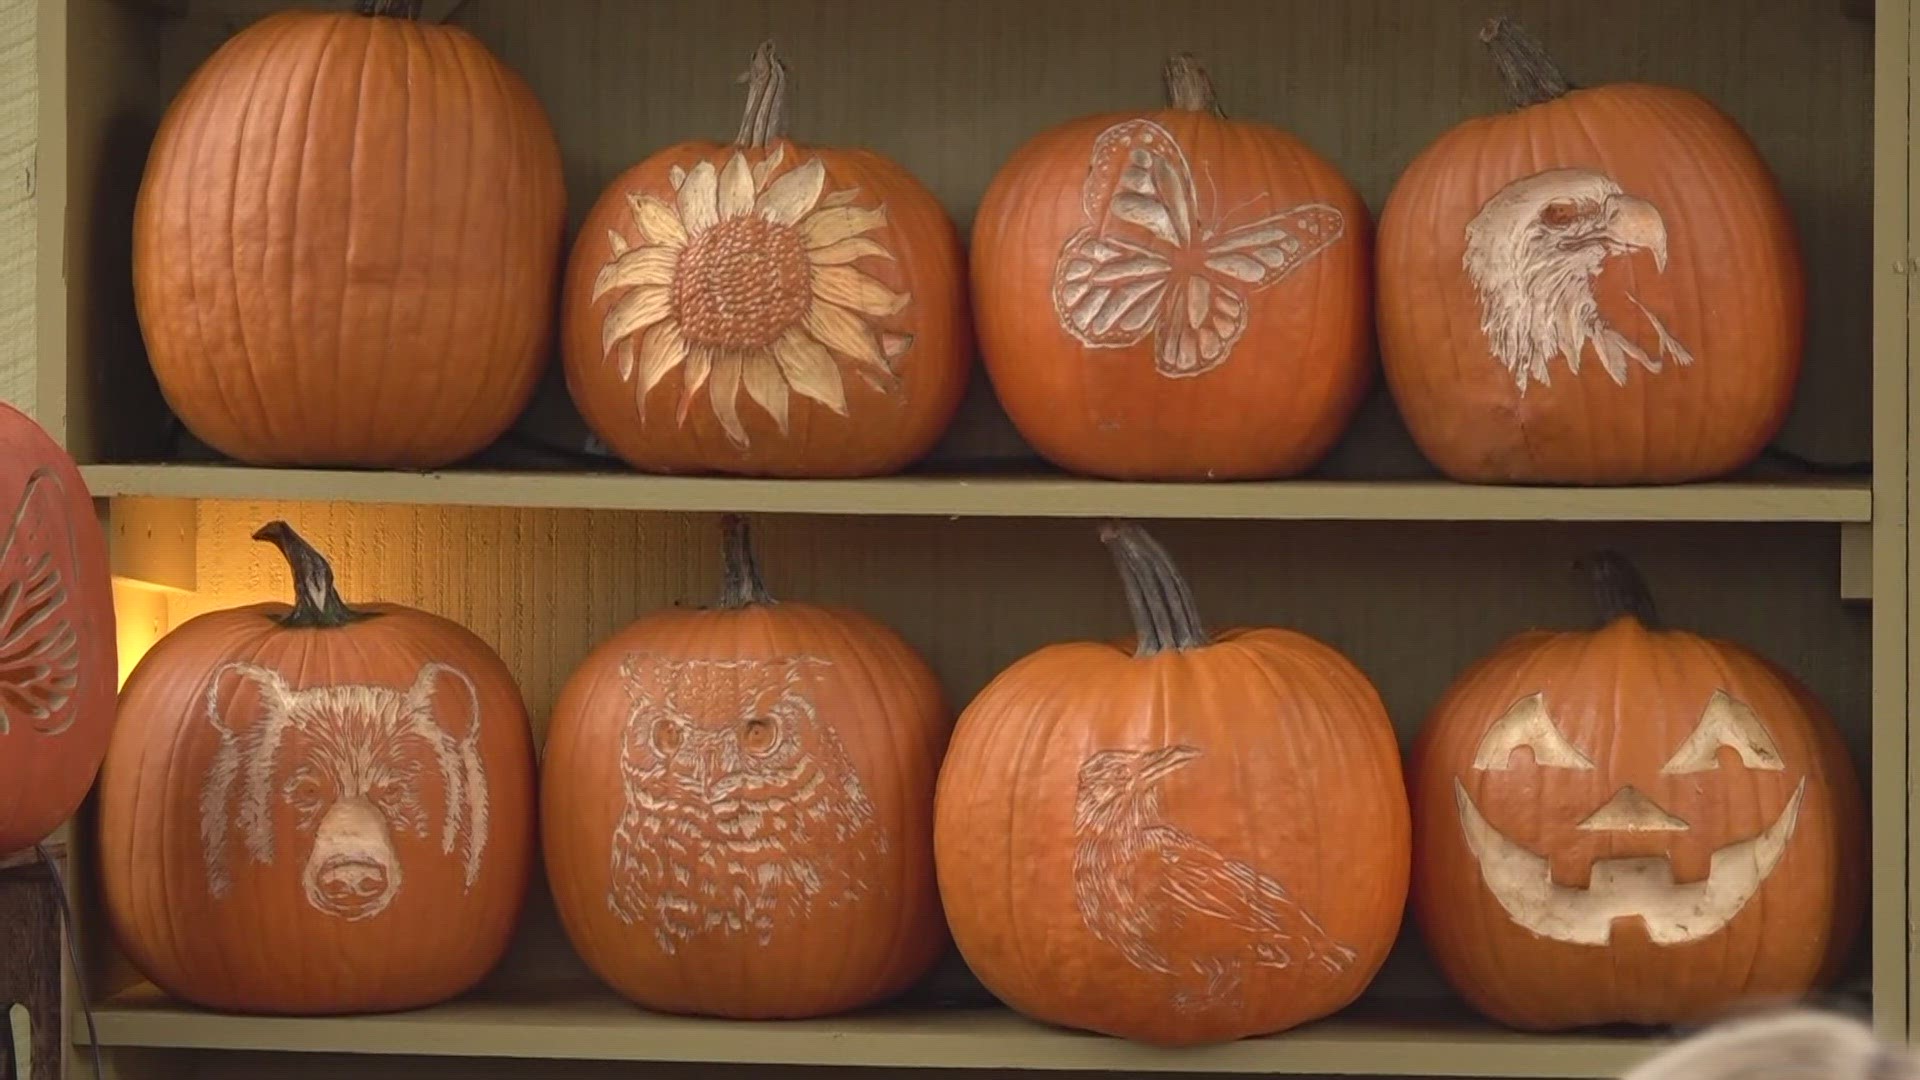 10 About Town's Katie Inman introduces us to the woman behind Dollywood's extravagant pumpkin carvings.